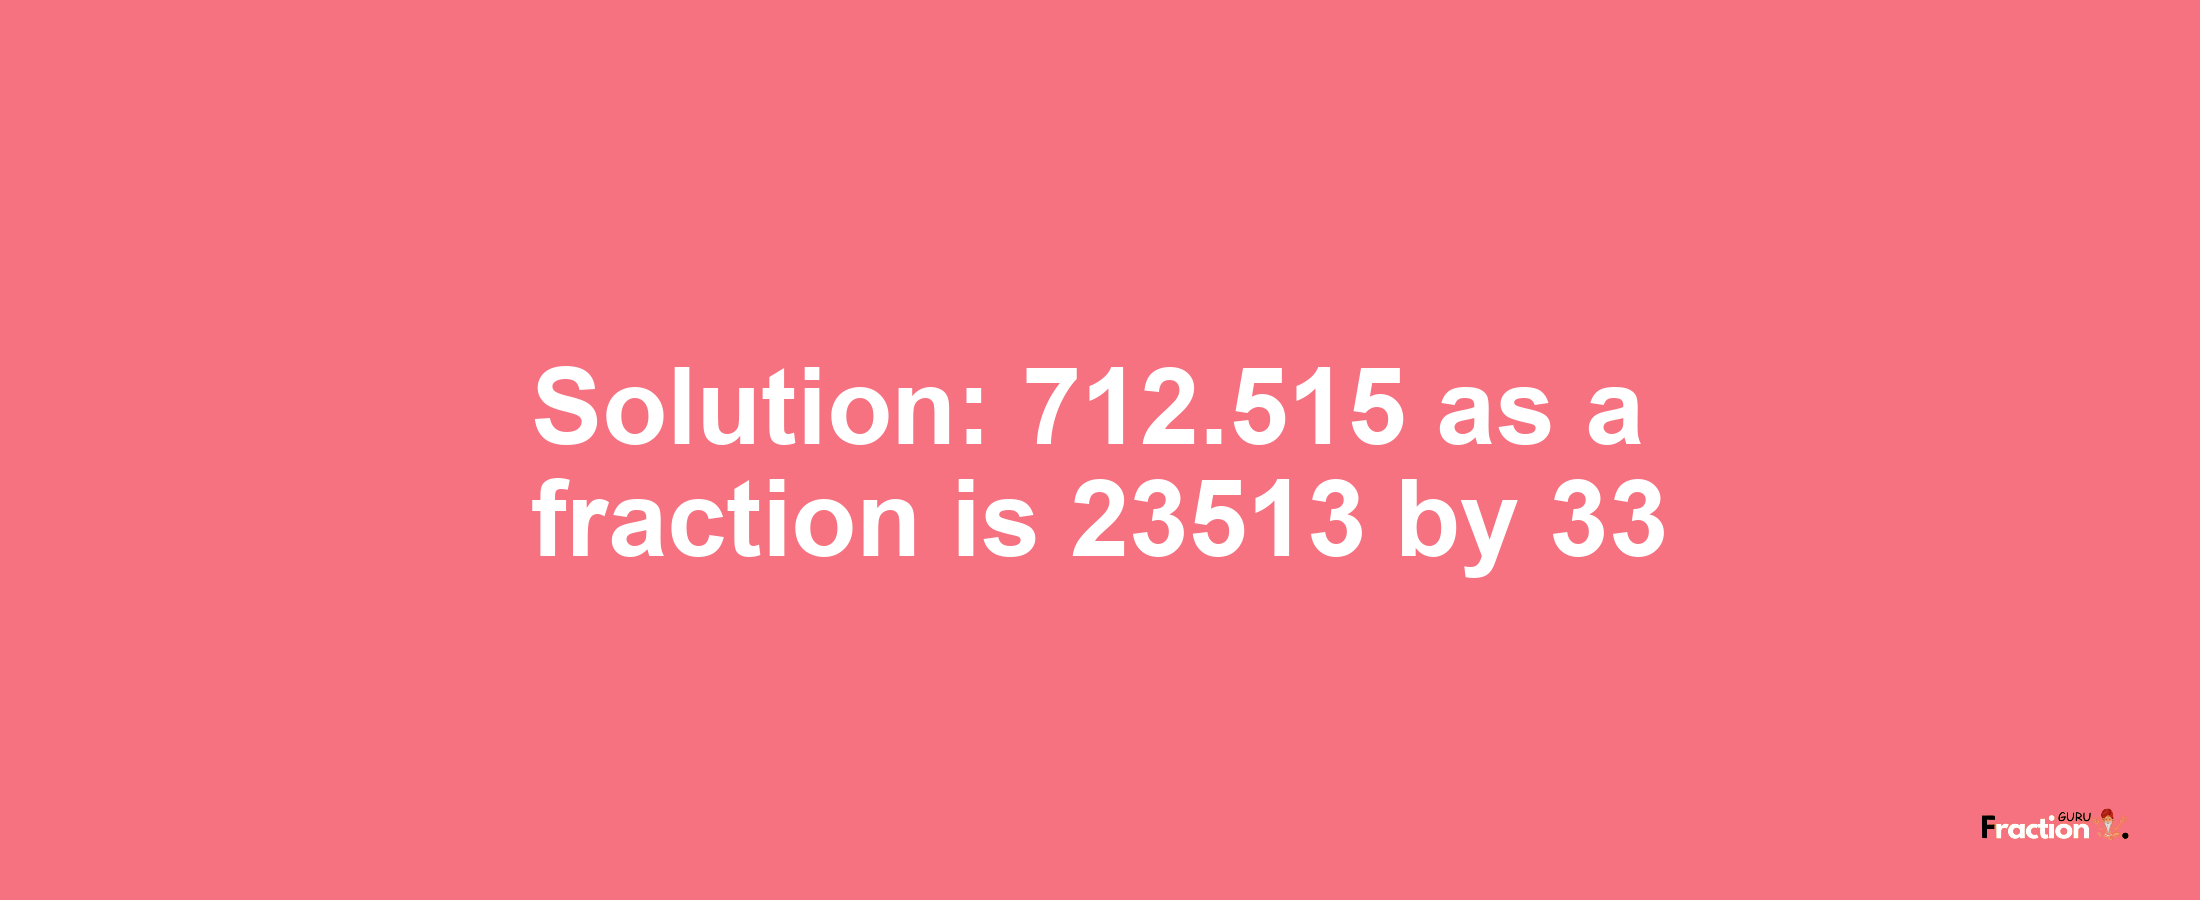 Solution:712.515 as a fraction is 23513/33